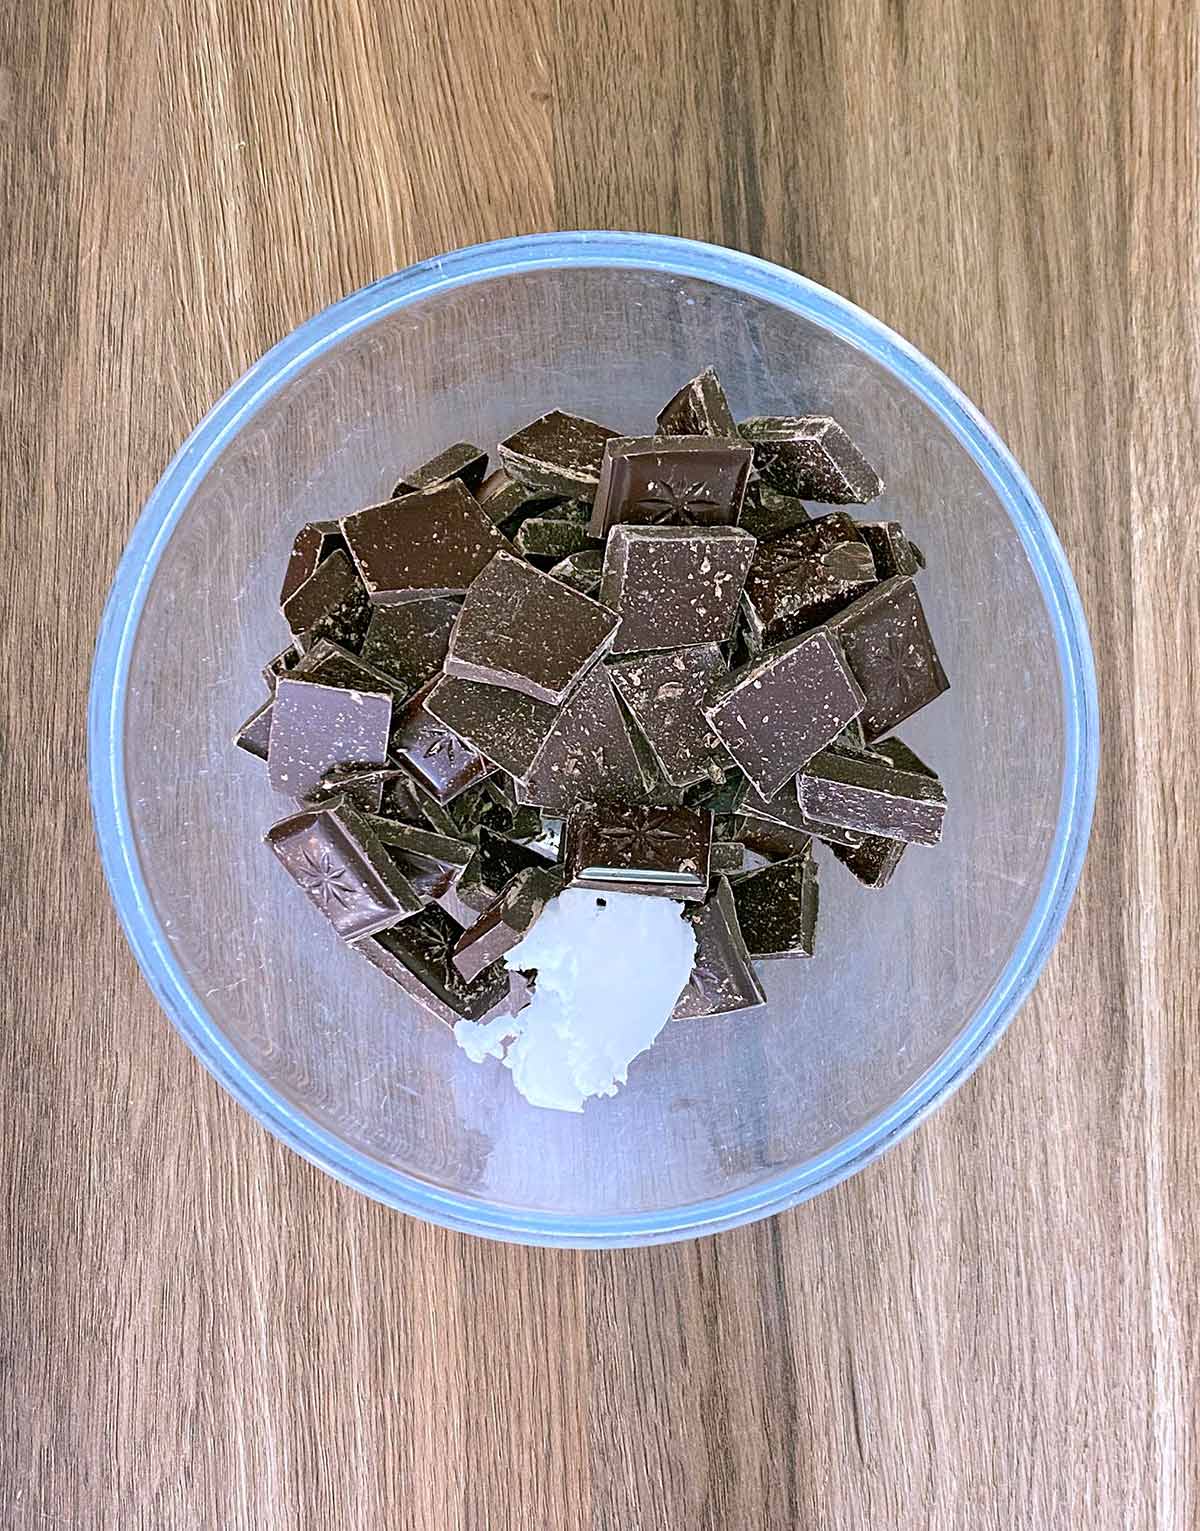 A glass bowl containing chunks of chocolate and coconut oil.